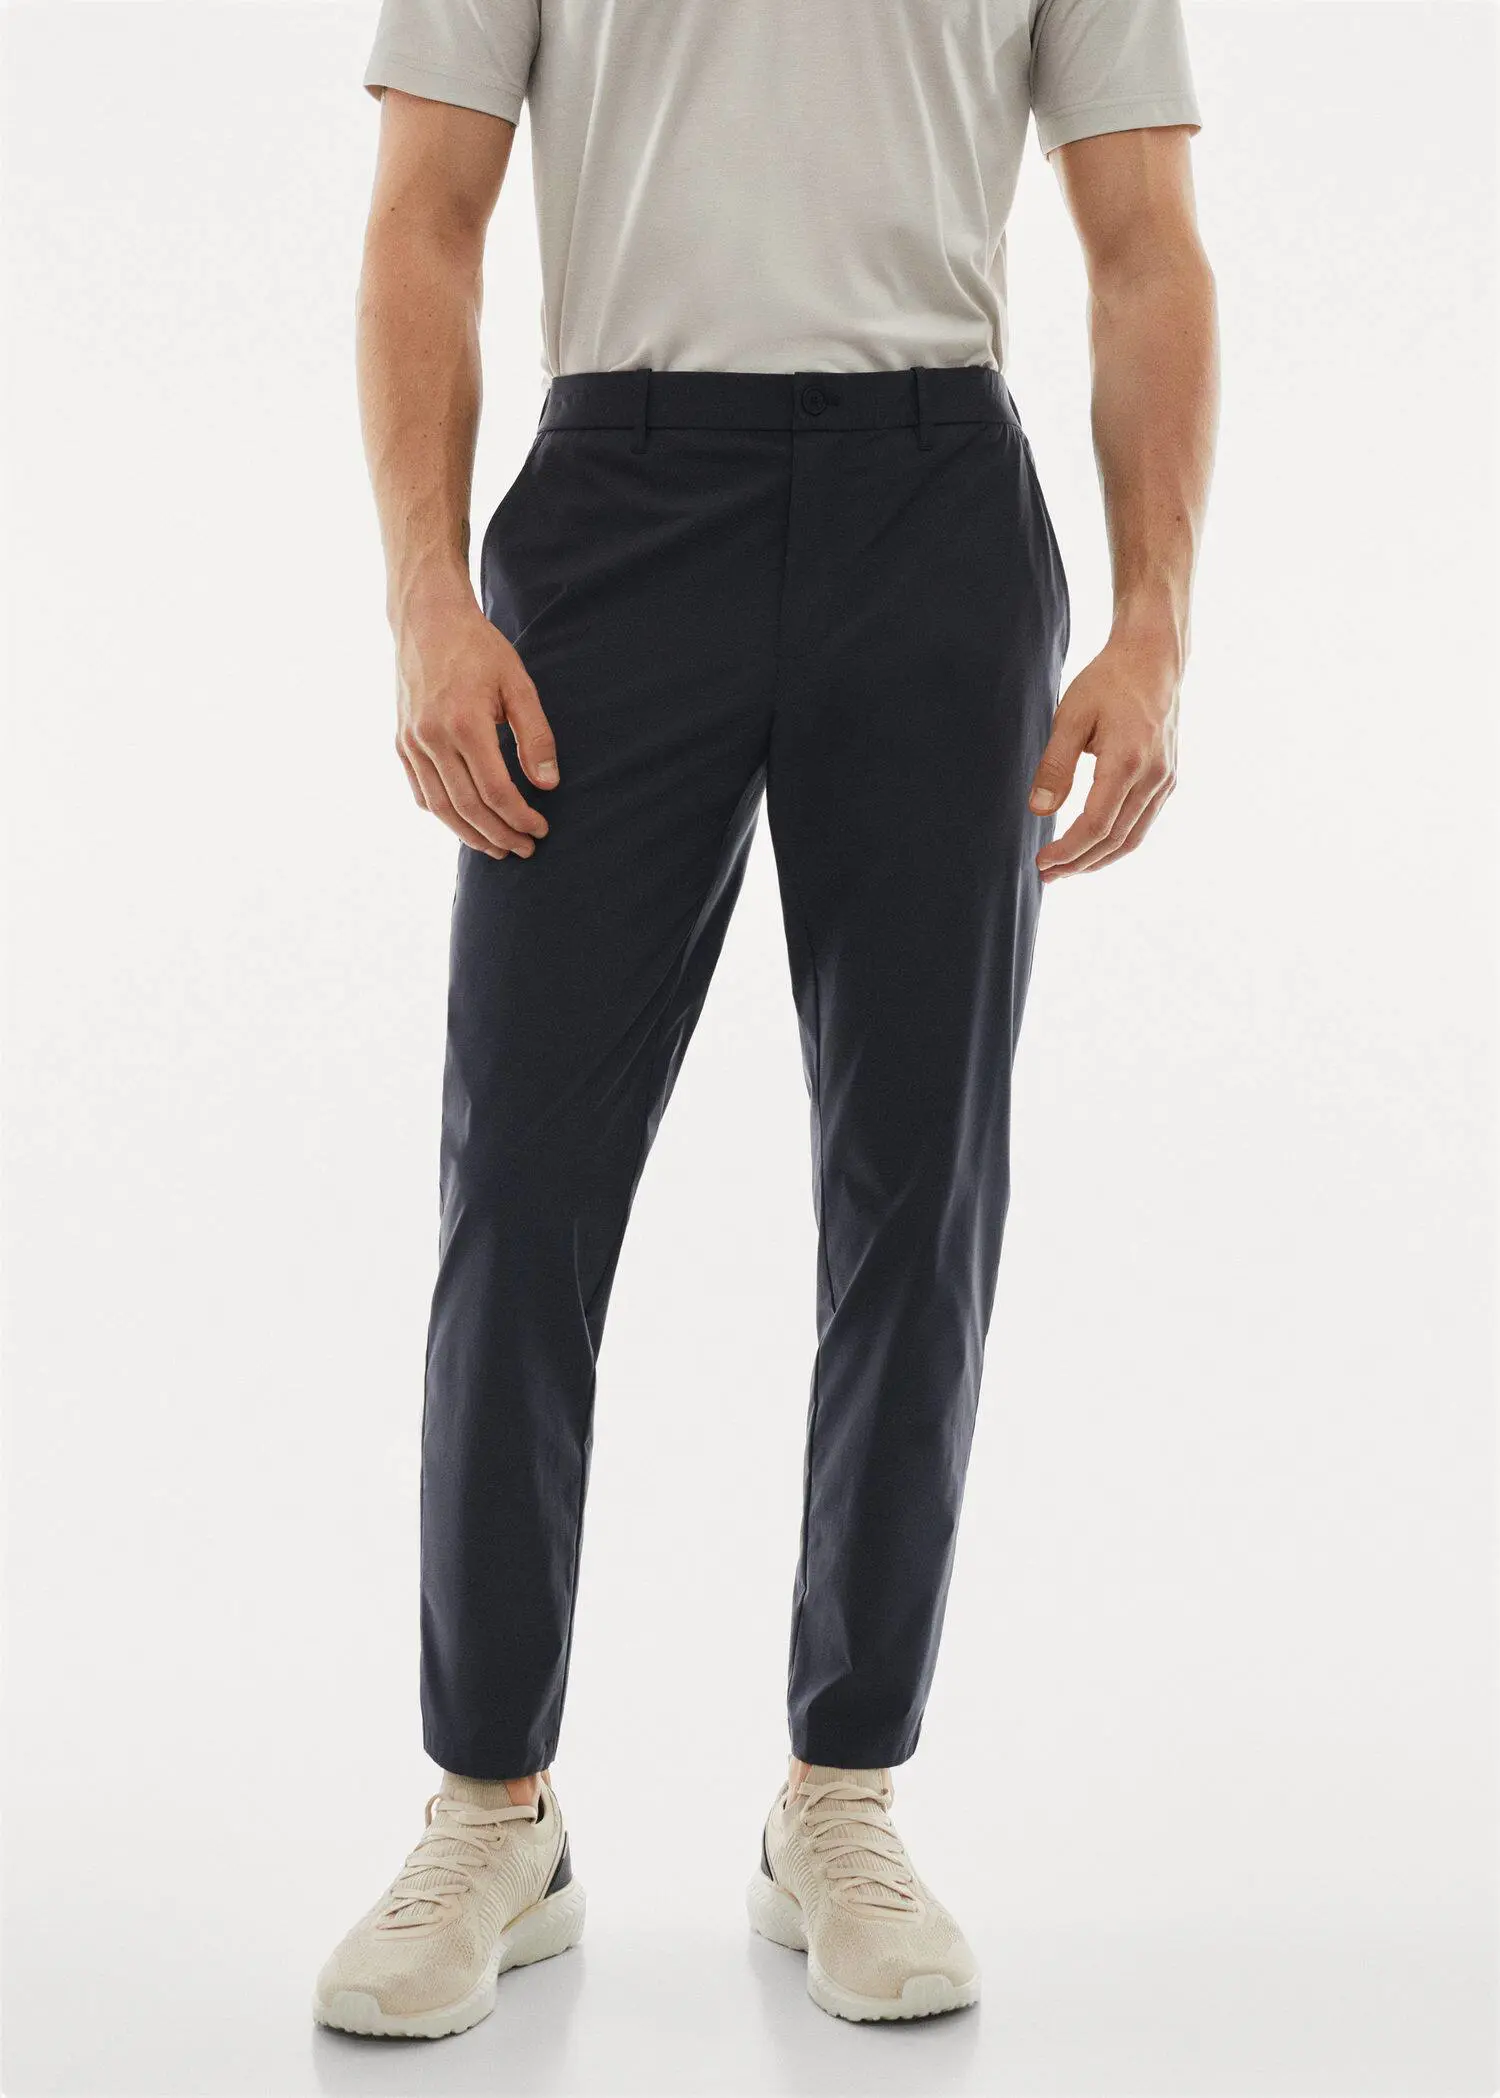 Mango Water-repellent technical trousers. a man wearing a pair of black dress pants. 